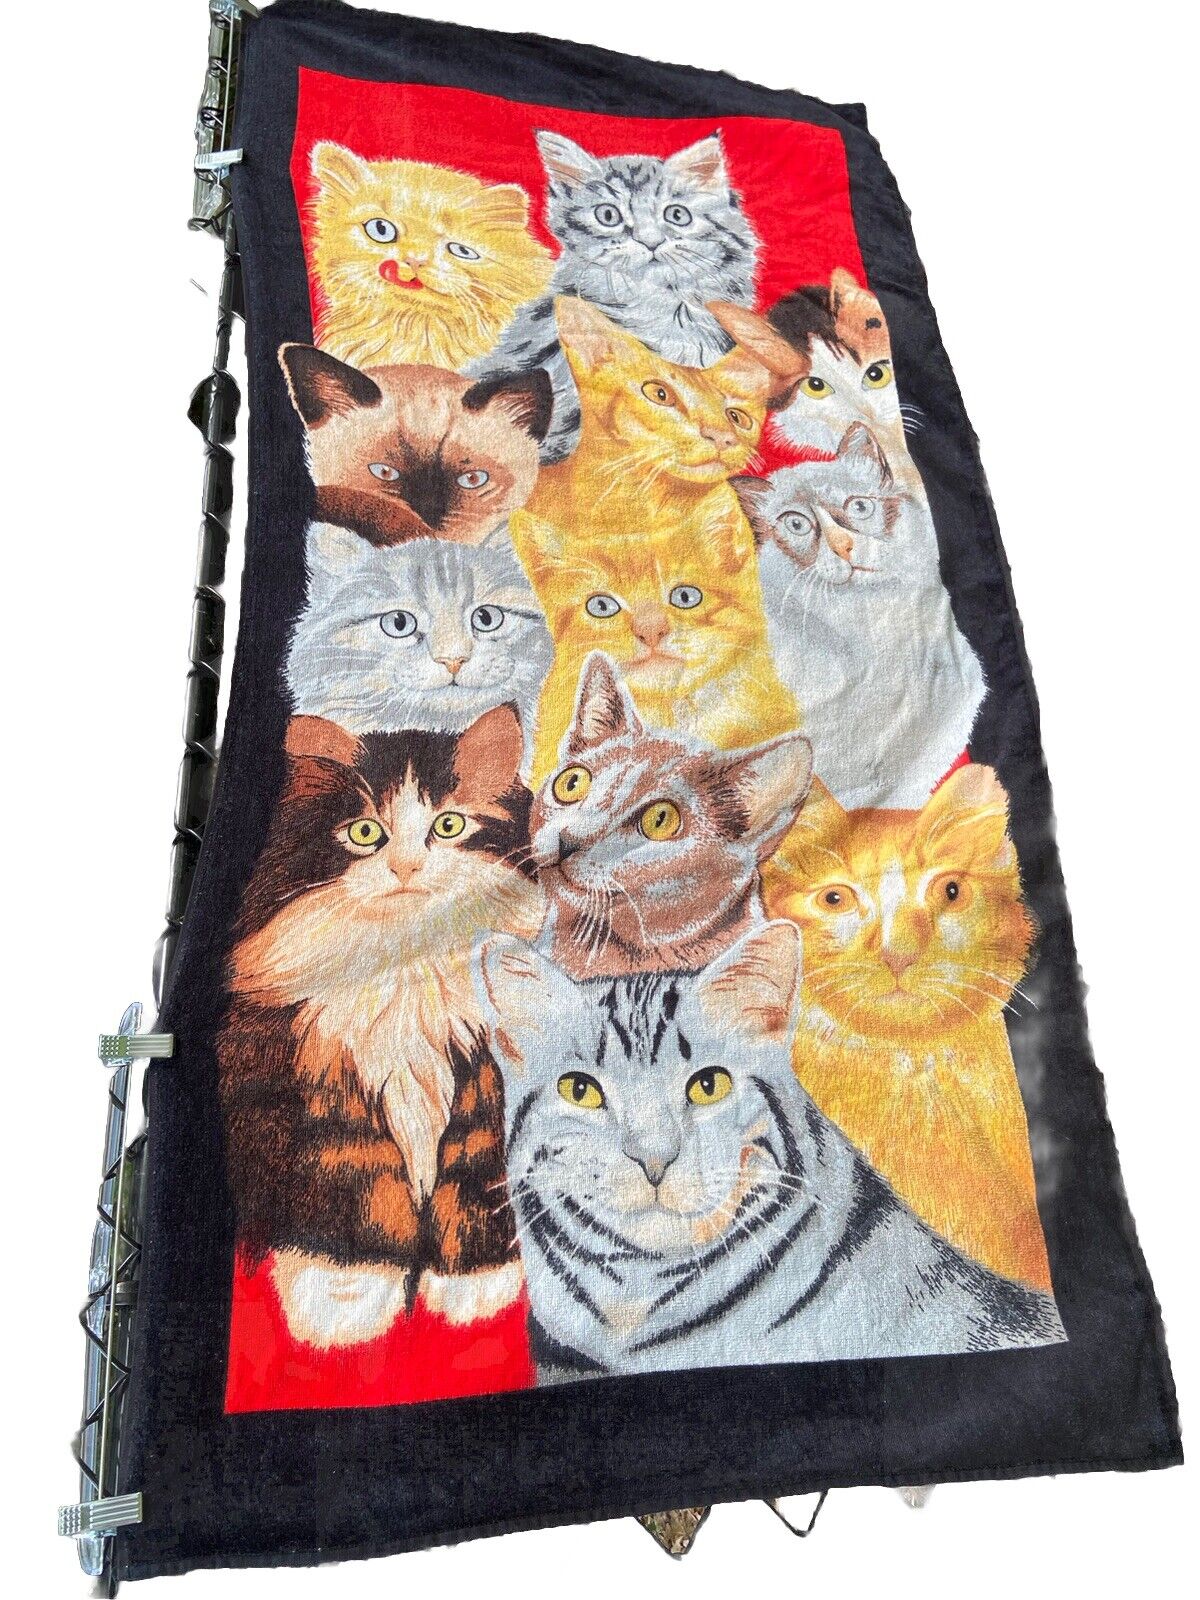 Hilasal THE CATS cotton Beach Towel vintage Ames 90s Cat kitten Faces collage